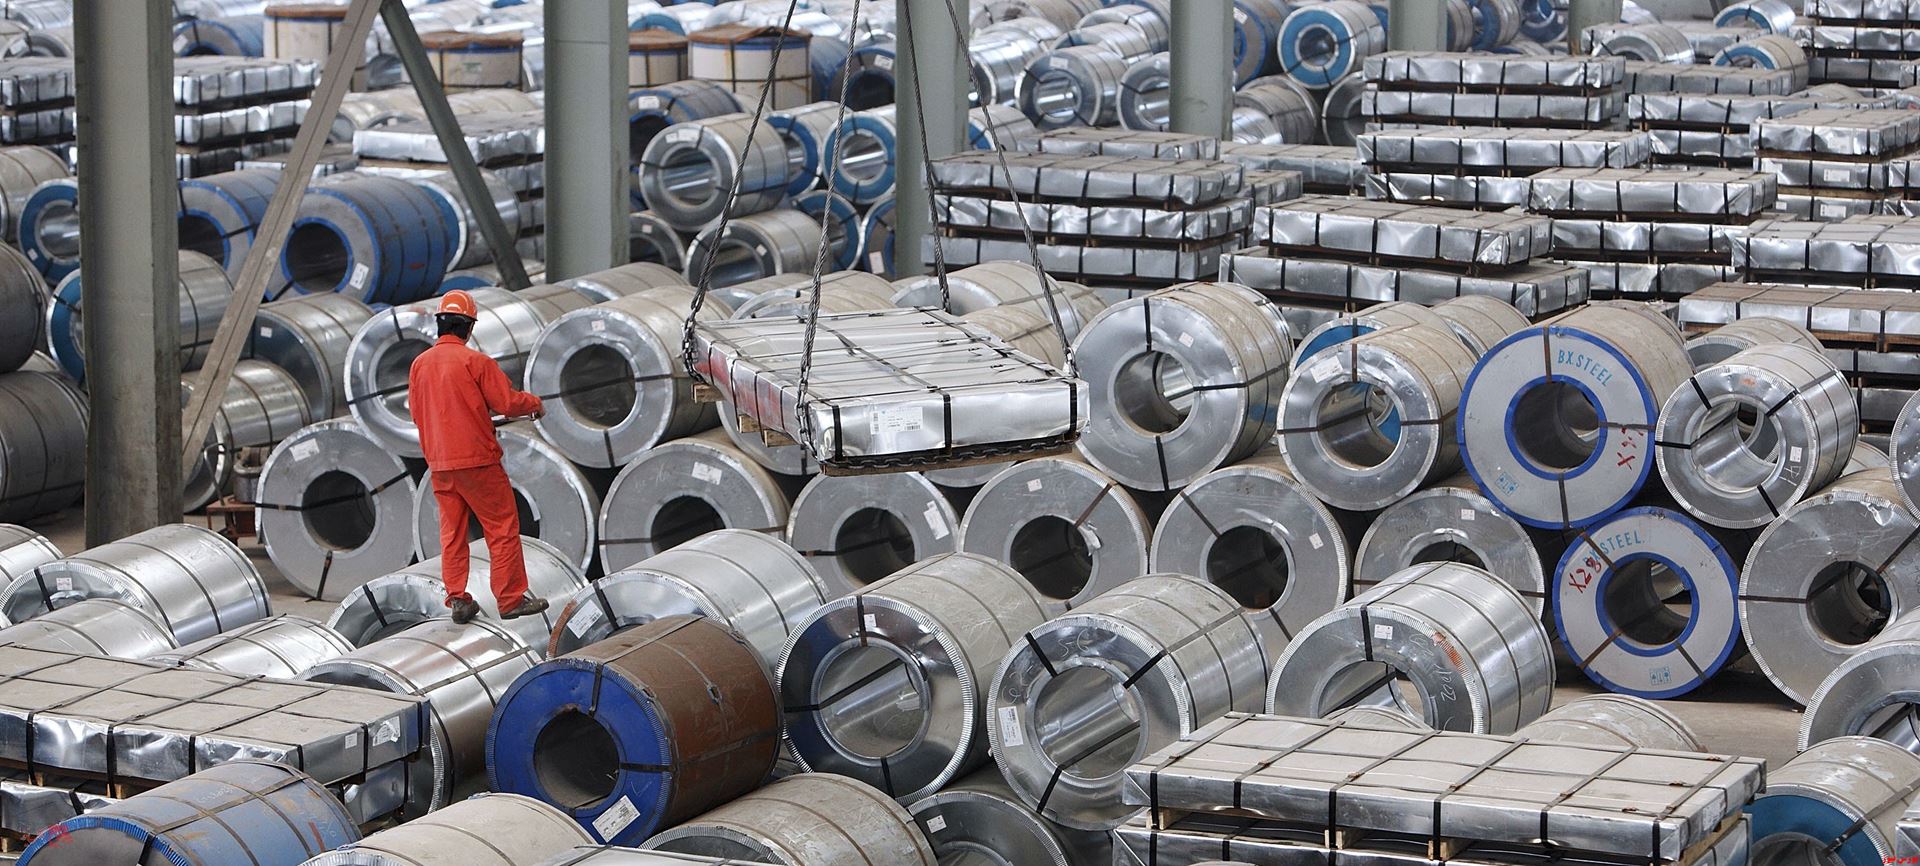 China's stainless steel exports up 13.76% on an annual basis